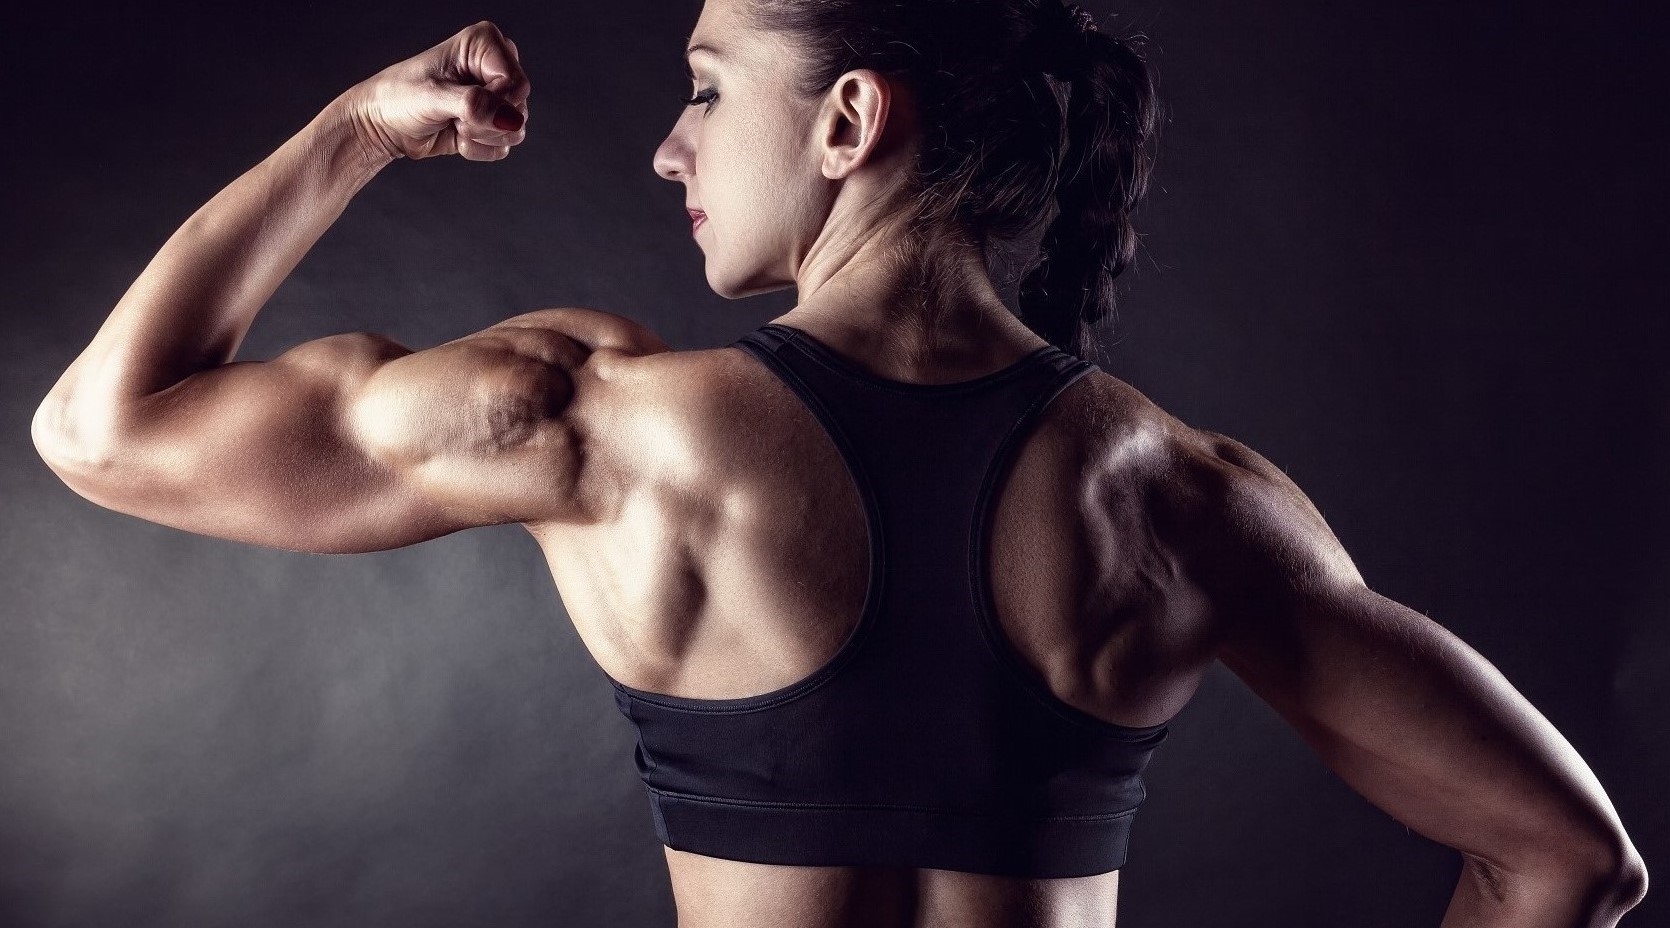 17 Extraordinary Facts About Biceps - Facts.net